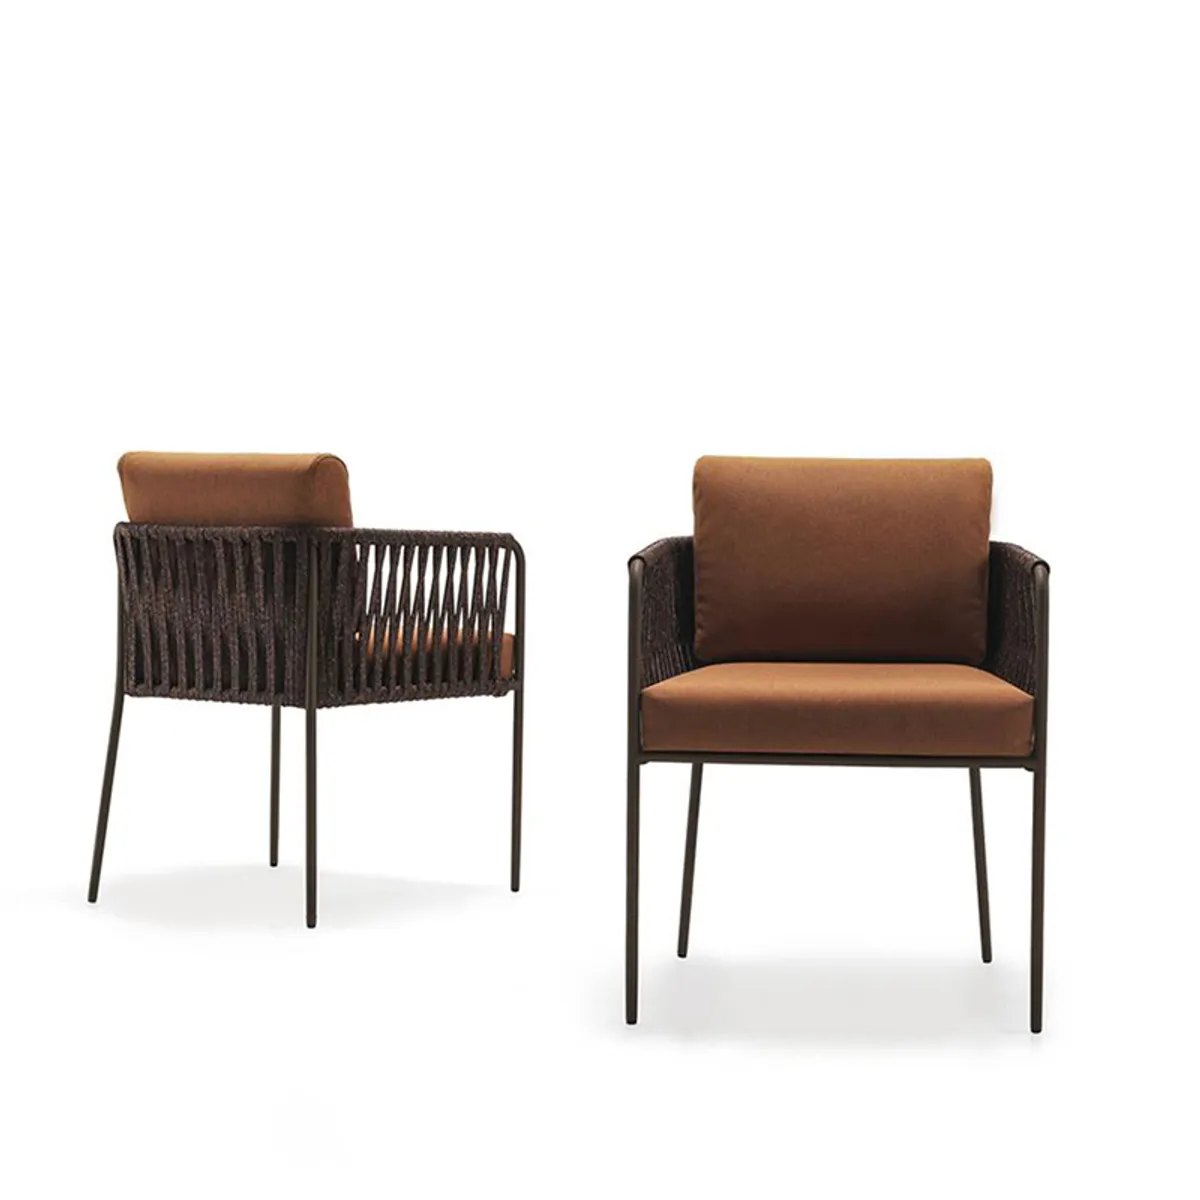 Hitch Armchair Exterior Woven Resturant Furniture Inside Out Contracts 6